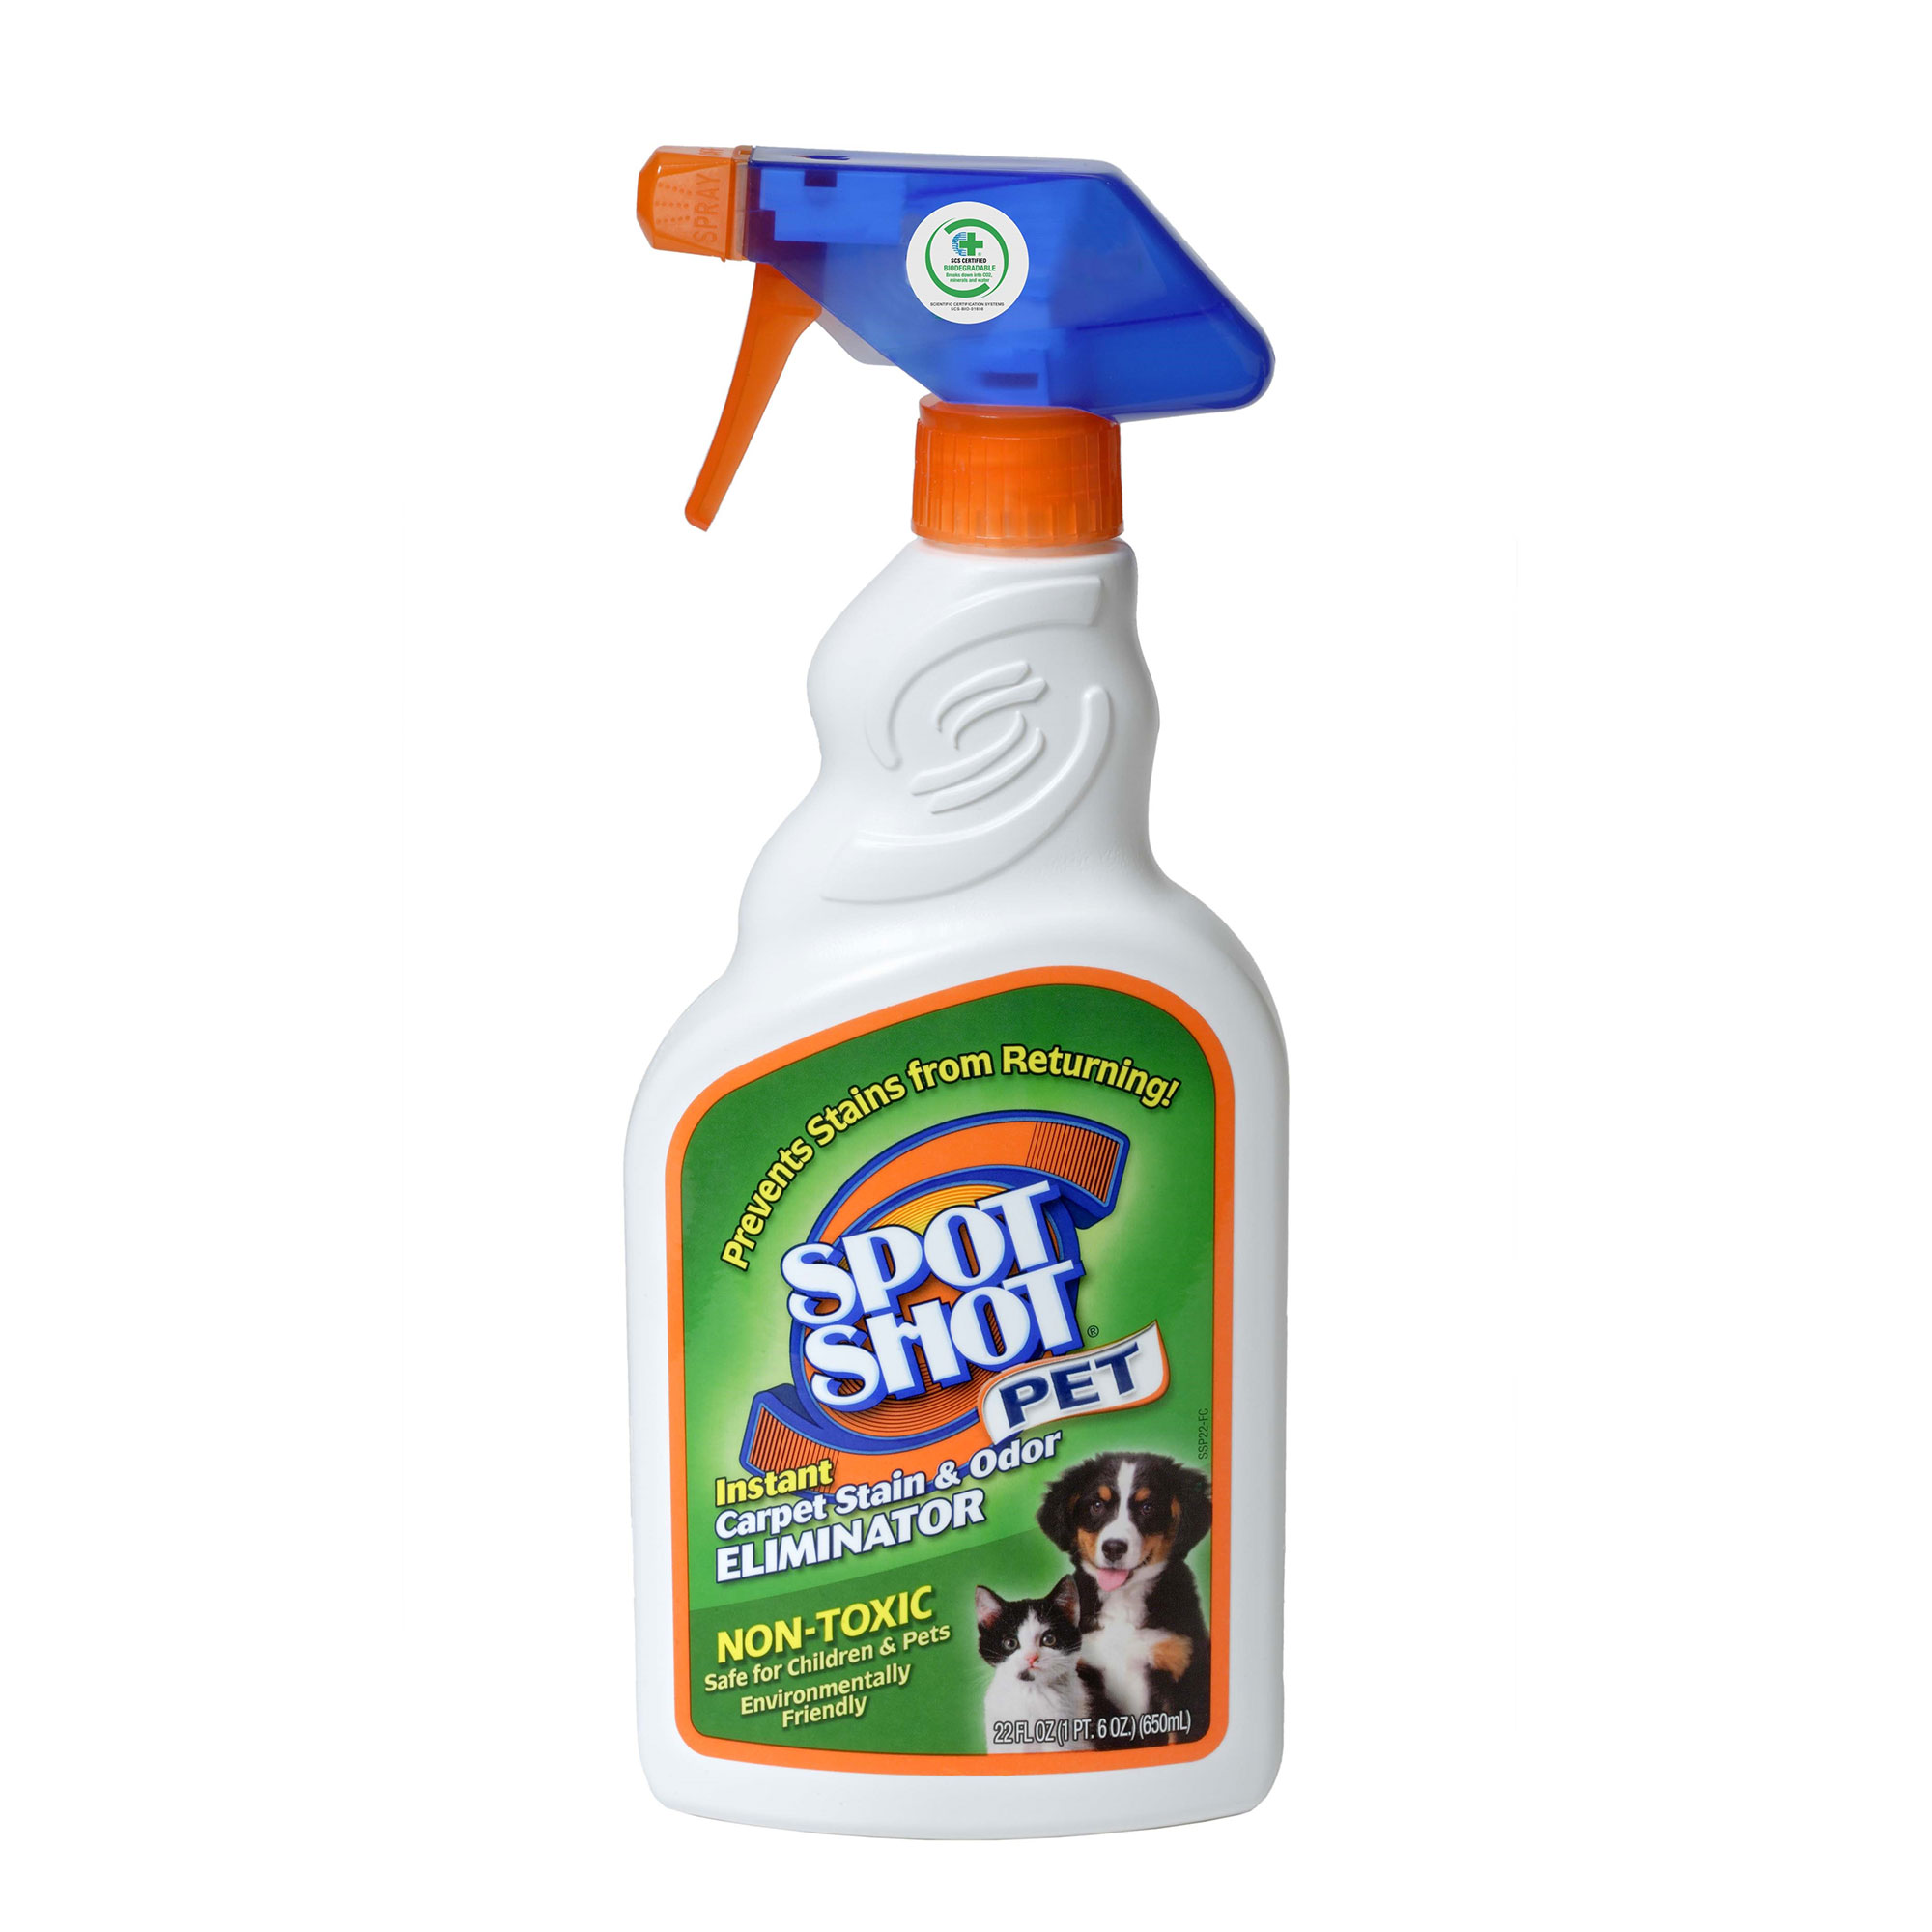 Spot Shot Pet Trigger Spray Non Toxic Carpet Stain and Odor Remover, 22 Ounces - image 1 of 2